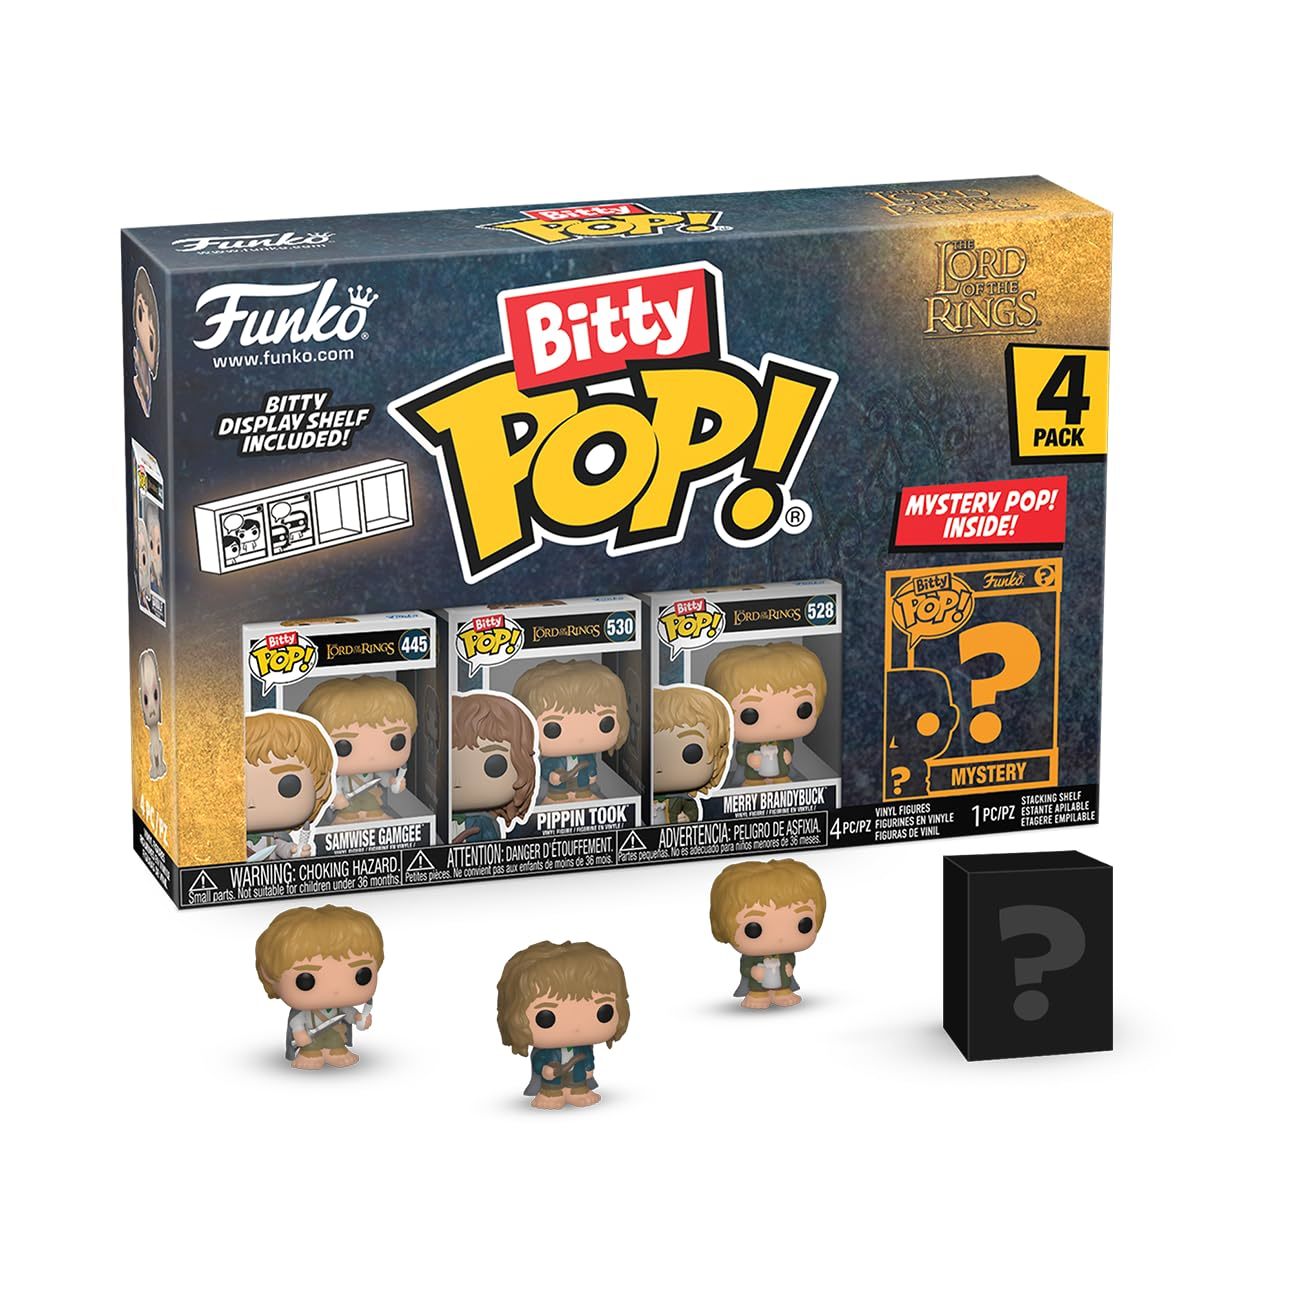 Funko Bitty Pop!: Lord of The Rings Mini Collectible Toys 4-Pack - Samwise Gamge - $25.47